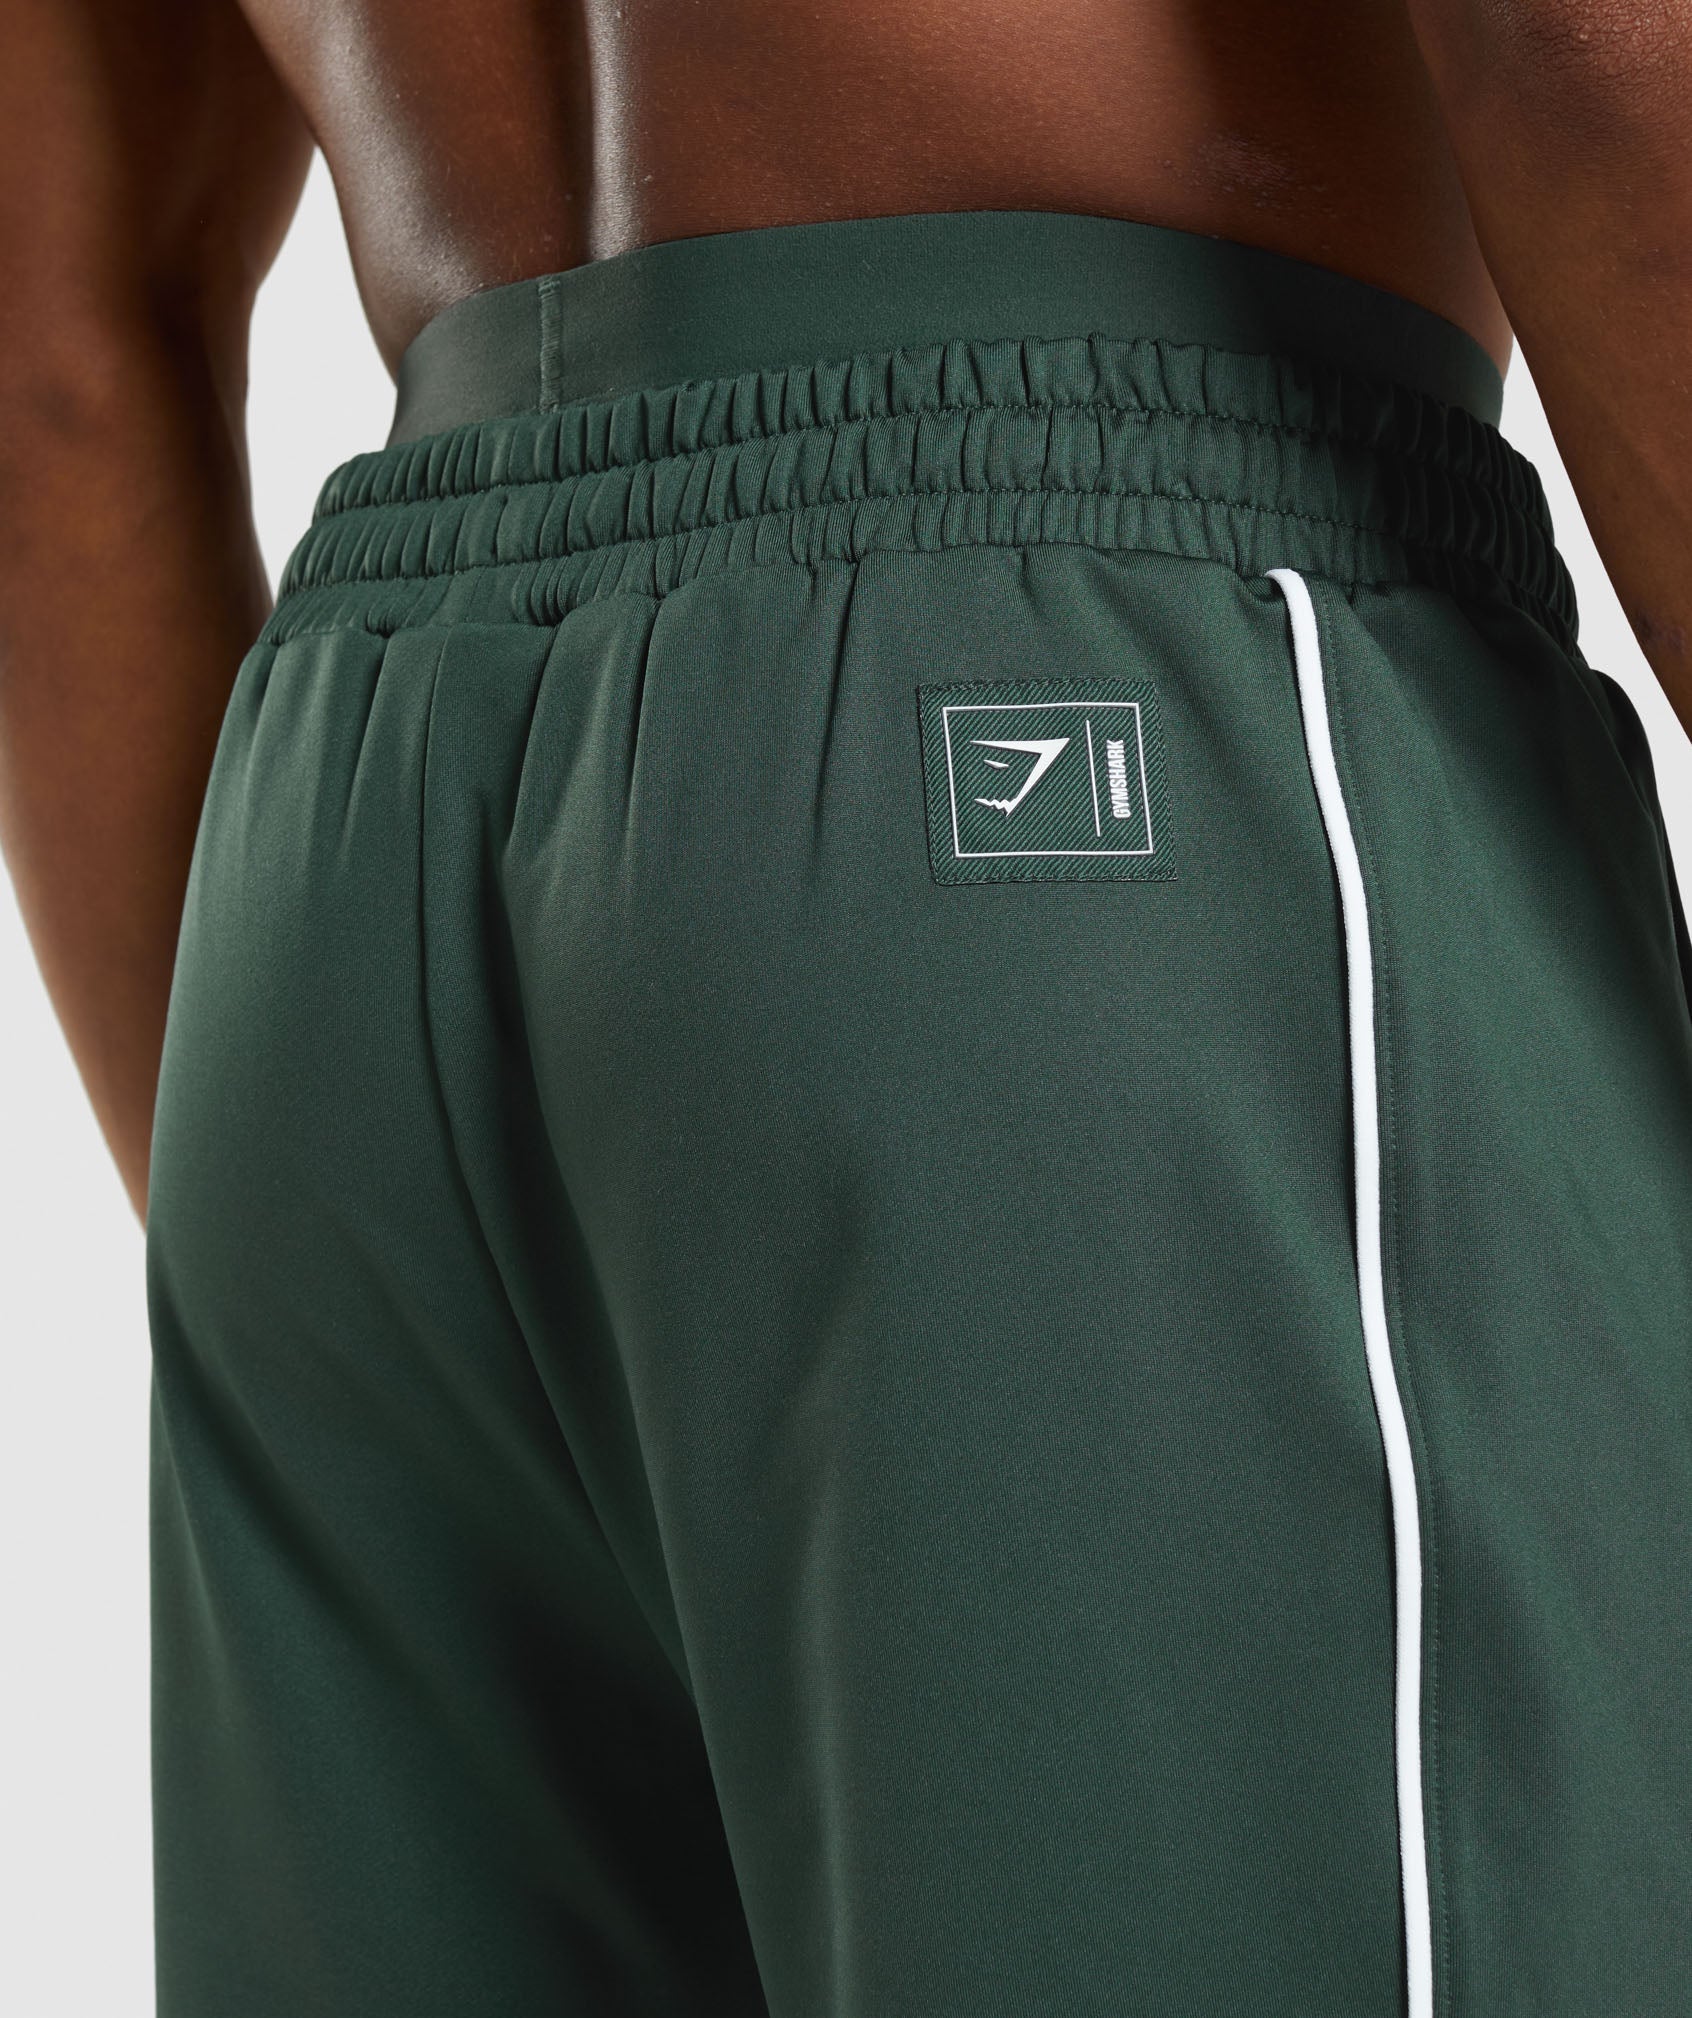 Gymshark Recess Joggers - Obsidian Green/White